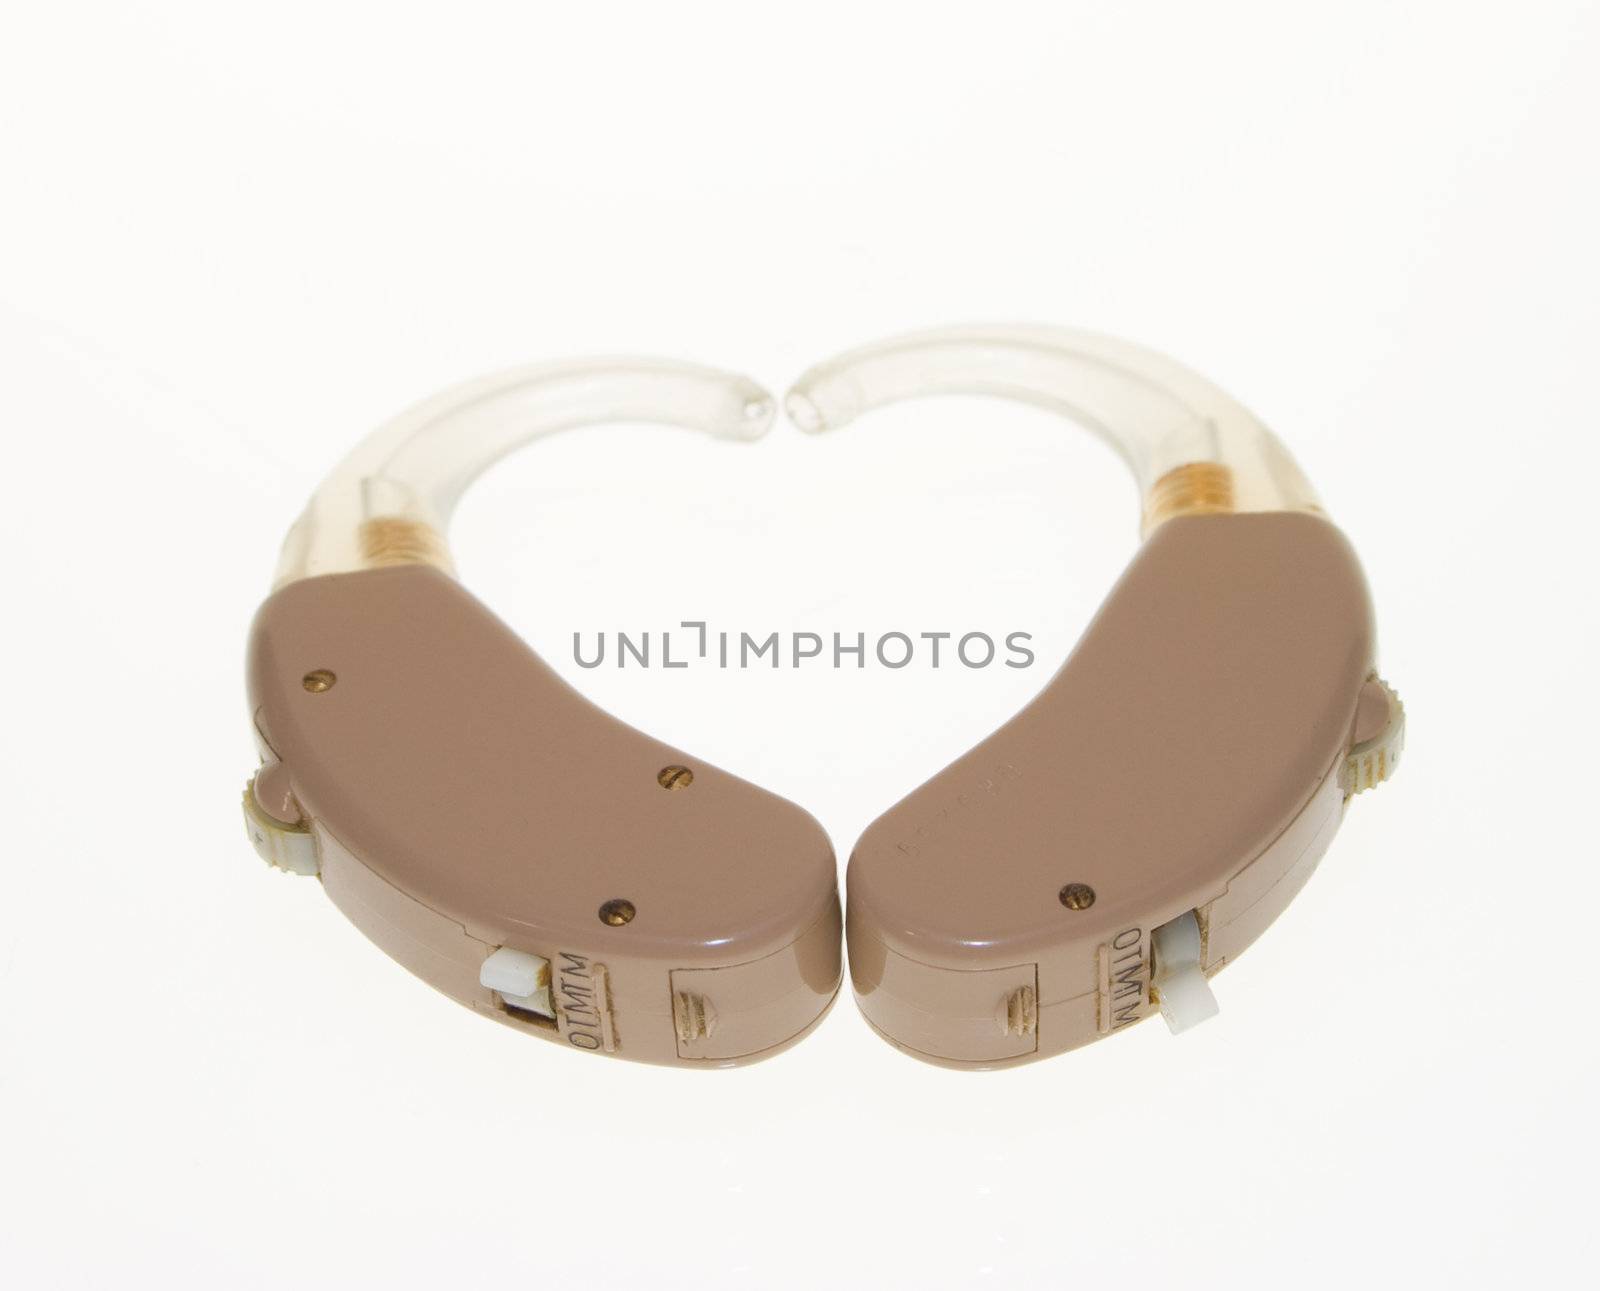 Heart shape made from two used analog hearing aids. Isolated on white.